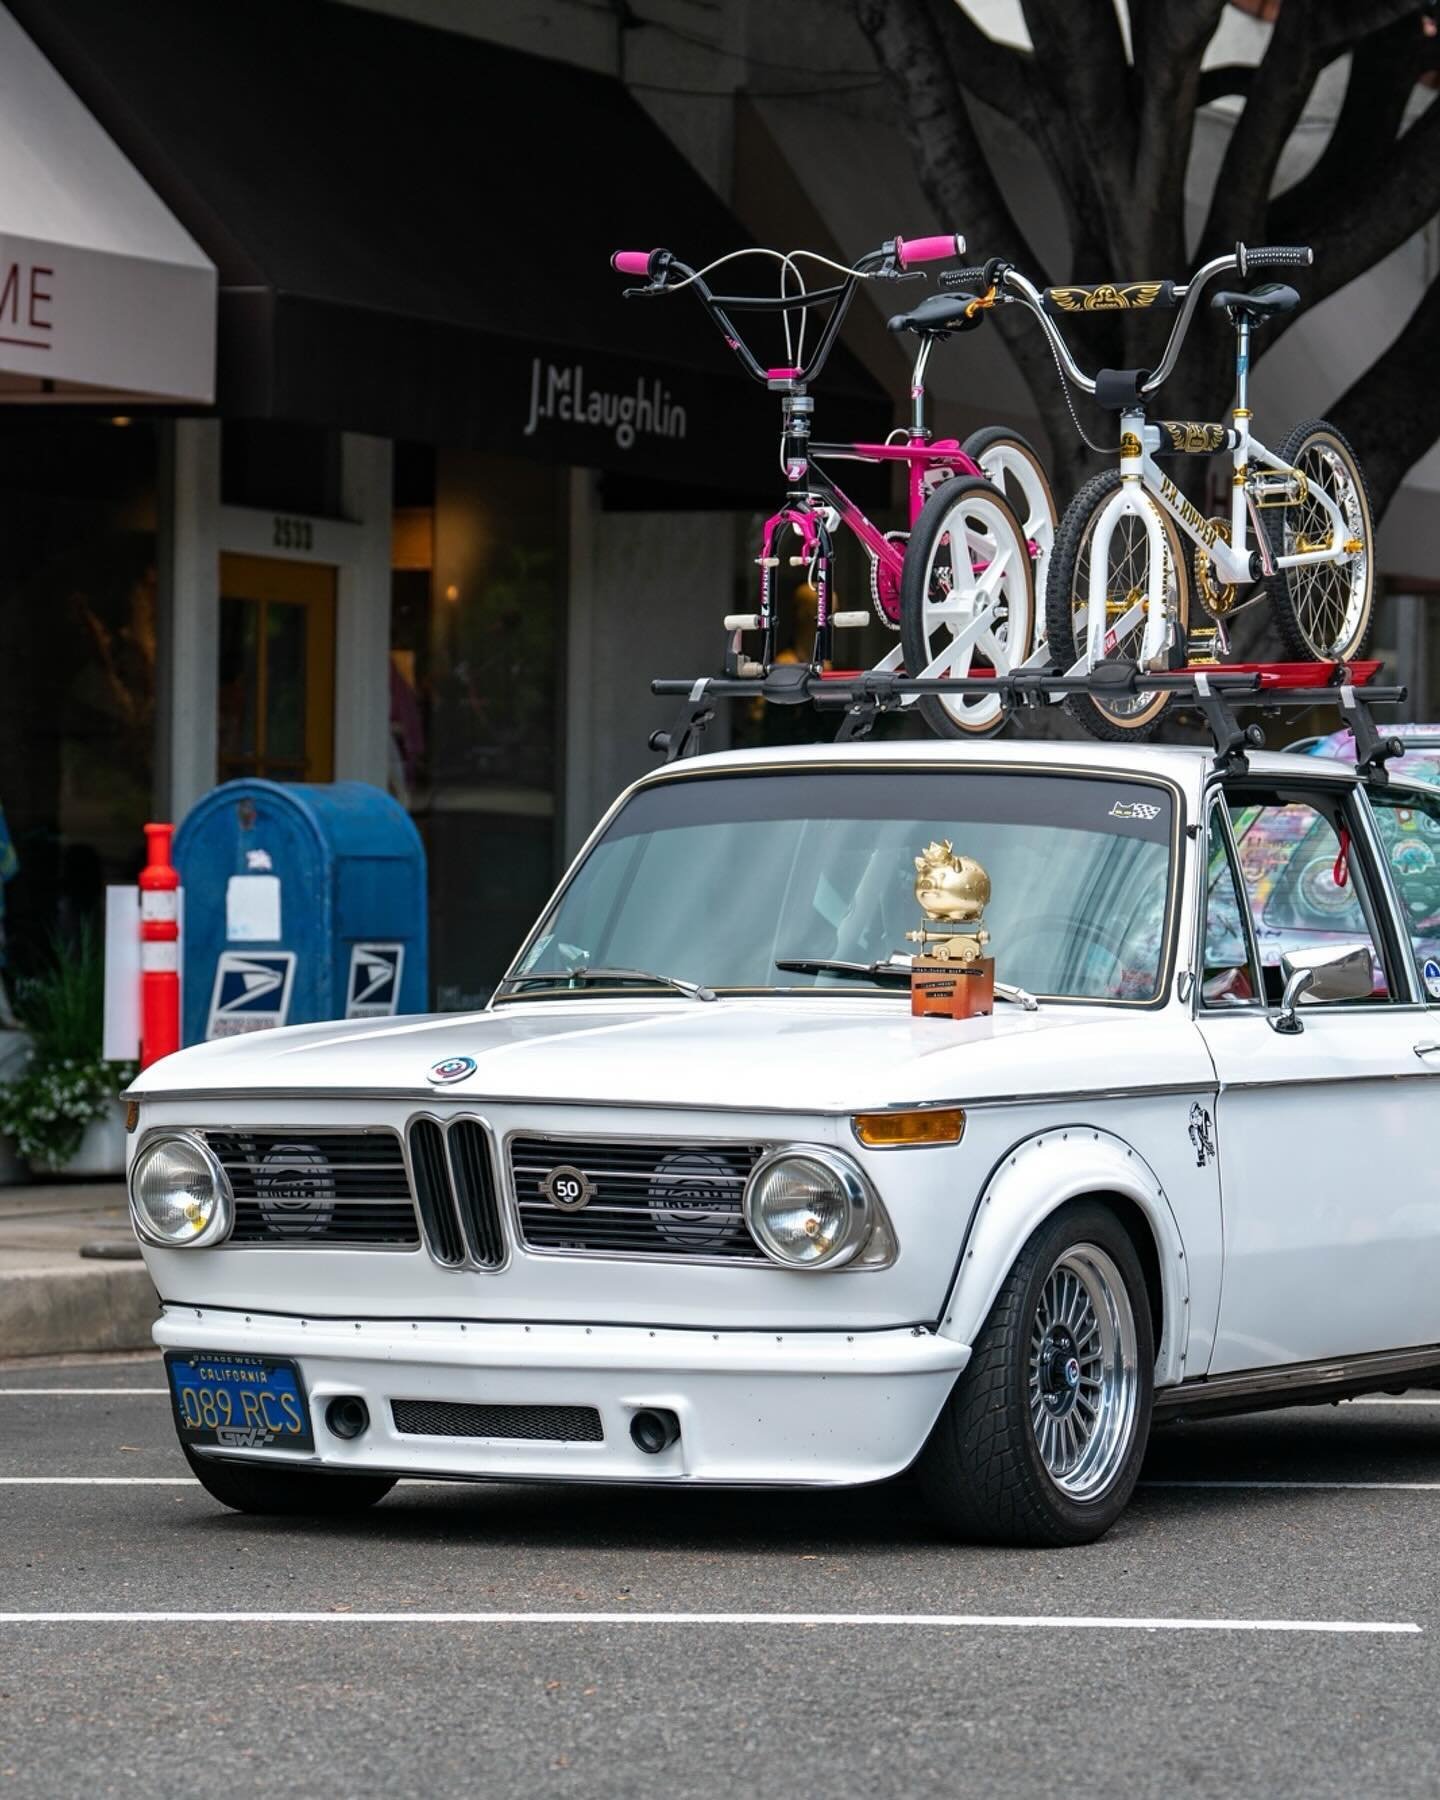 🚨 ITS ALMOST HERE ‼️

Saturday, May 18th is the LA Invitational, followed by the 7th Annual BIKE/CAR SHOW + SWAP MEET on Sunday, the 19th!

What will this year&rsquo;s custom gold-plated 72-carat trophies by @adamkmasters look like?! What banger bik